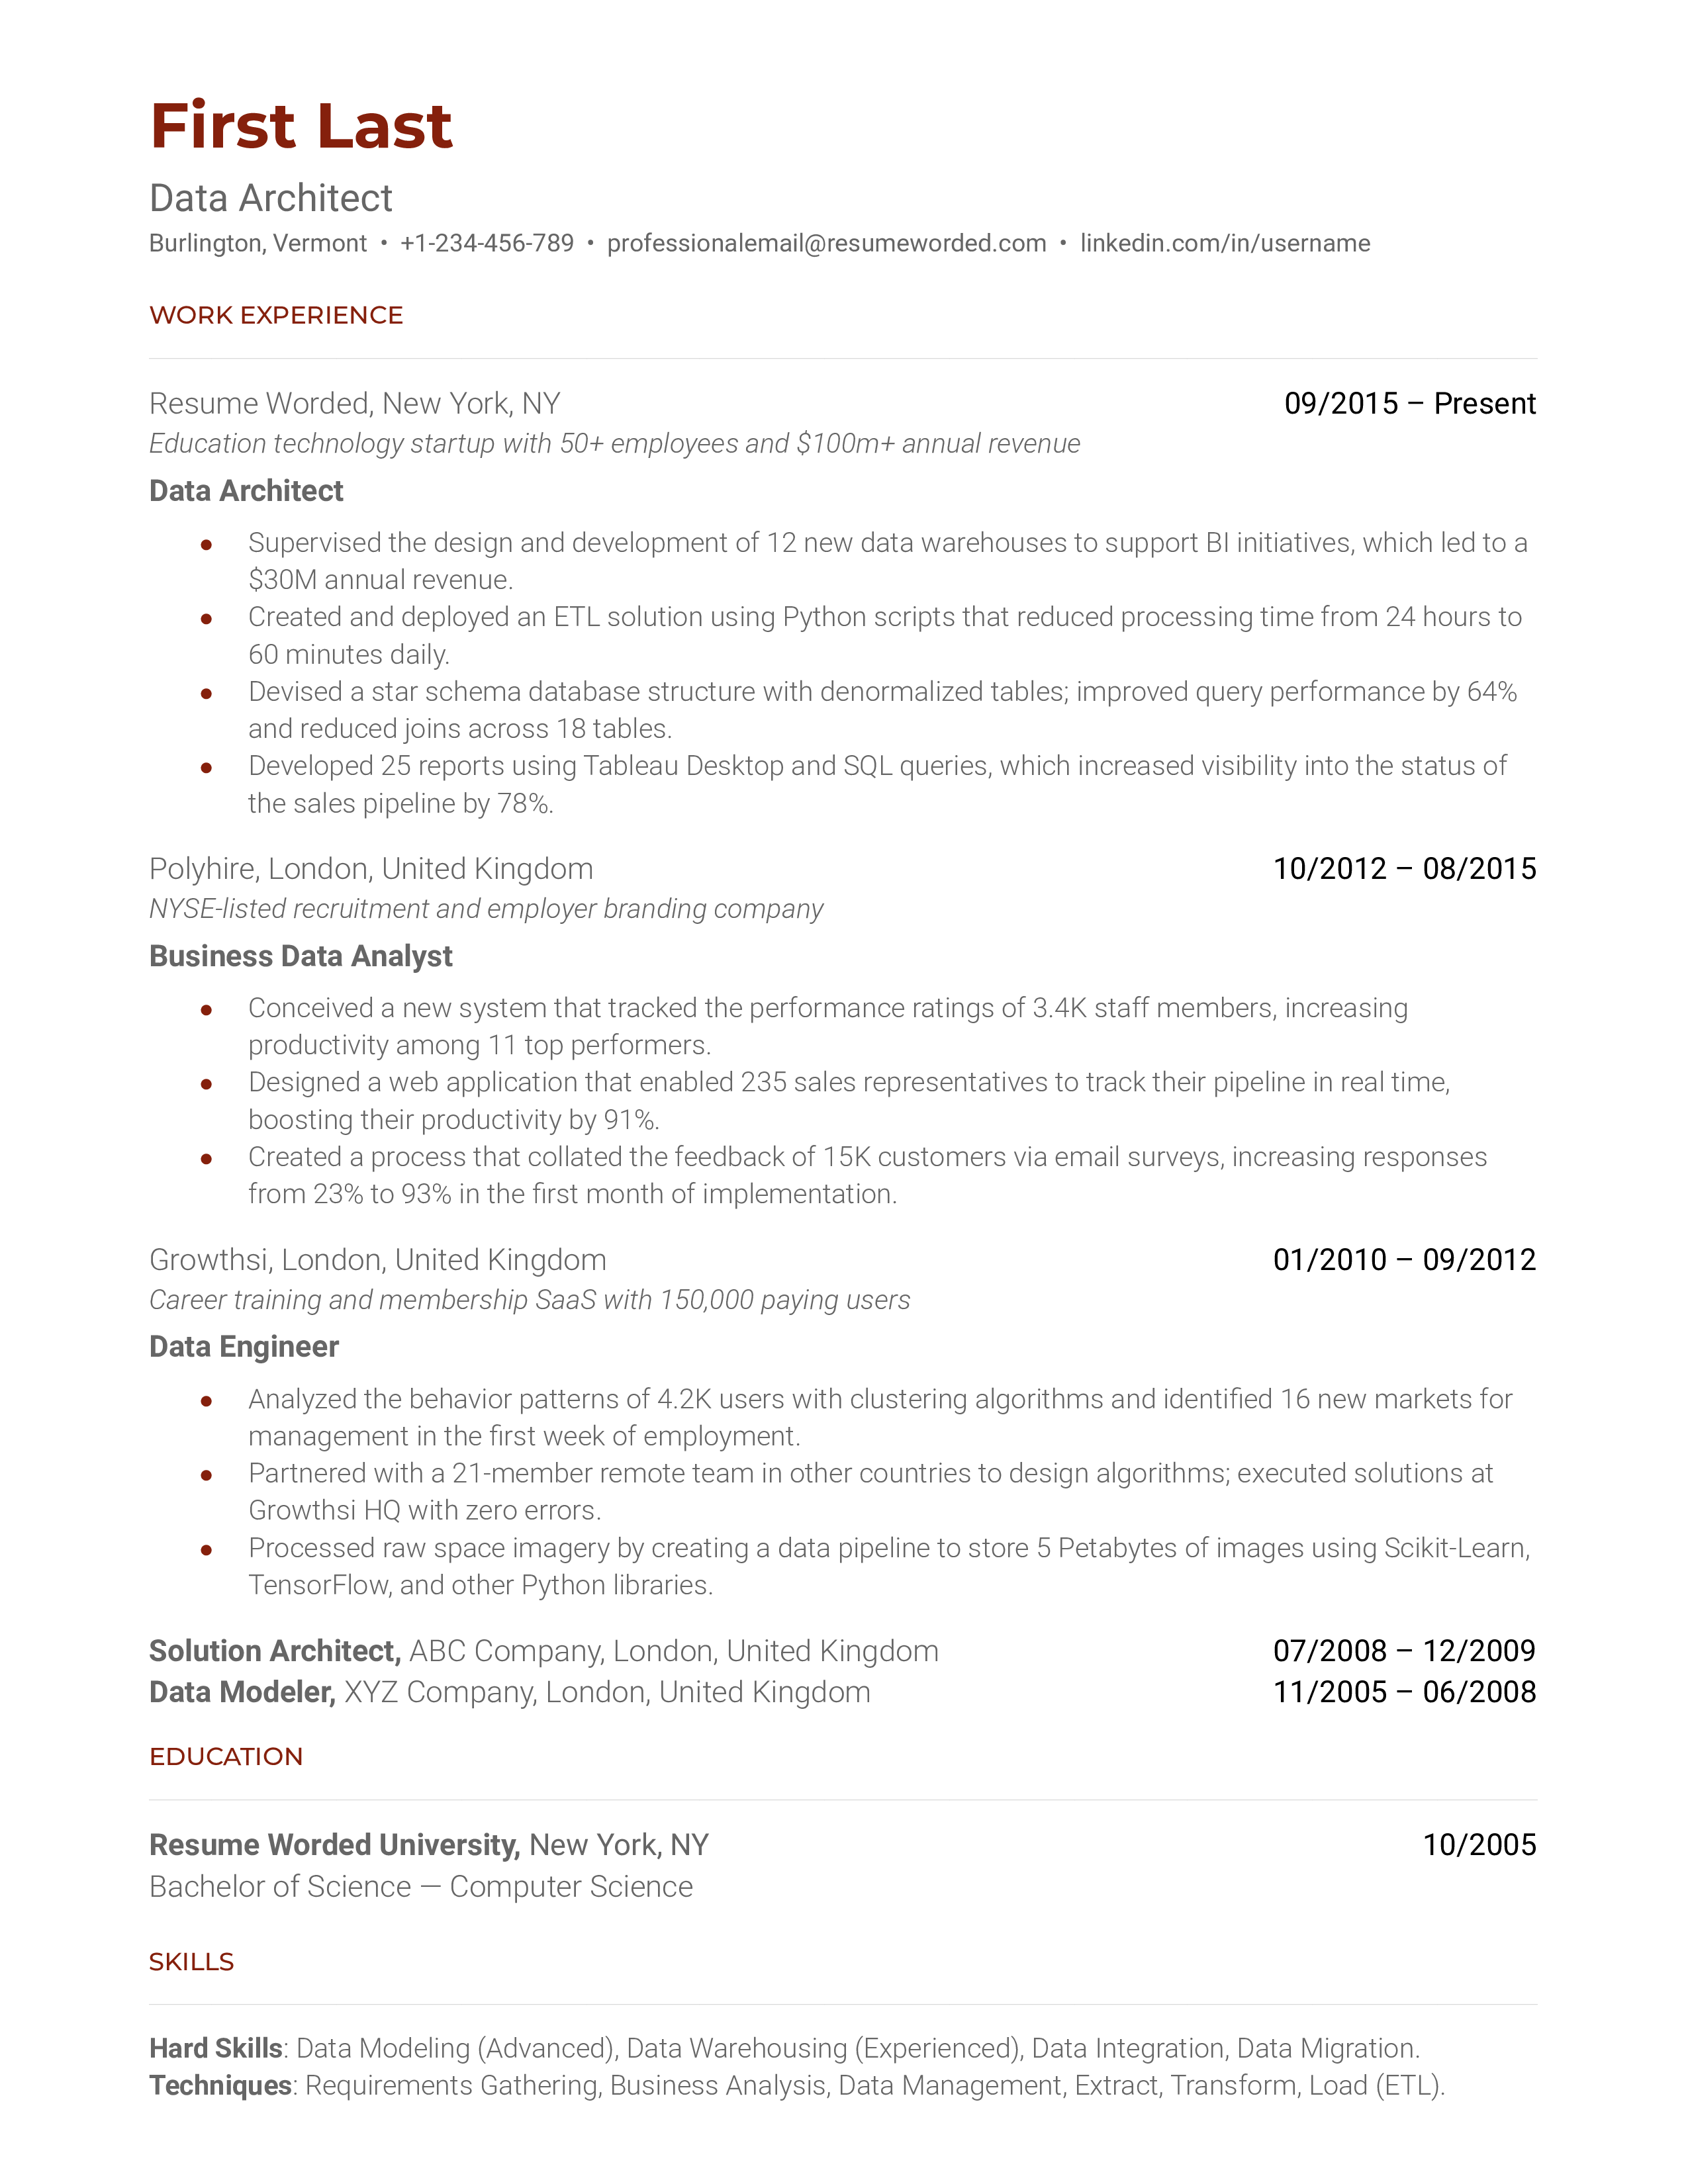 A well-crafted CV for a Data Architect detailing technology expertise and strategic impacts.